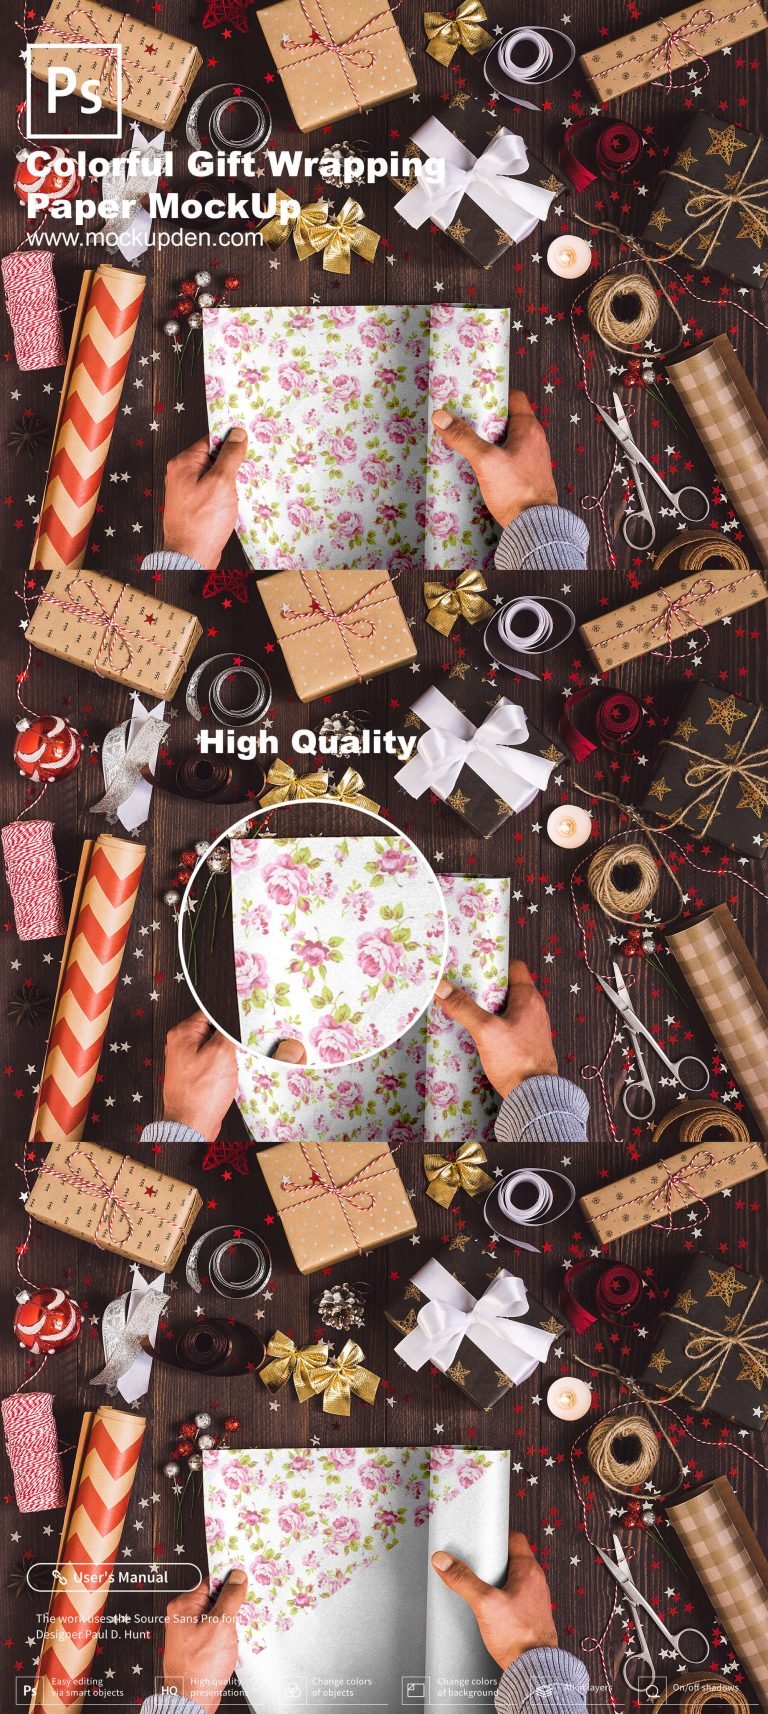 Download Gift Wrapping Paper Mockup |30+ Best PSD Gift Wrapping Paper Template